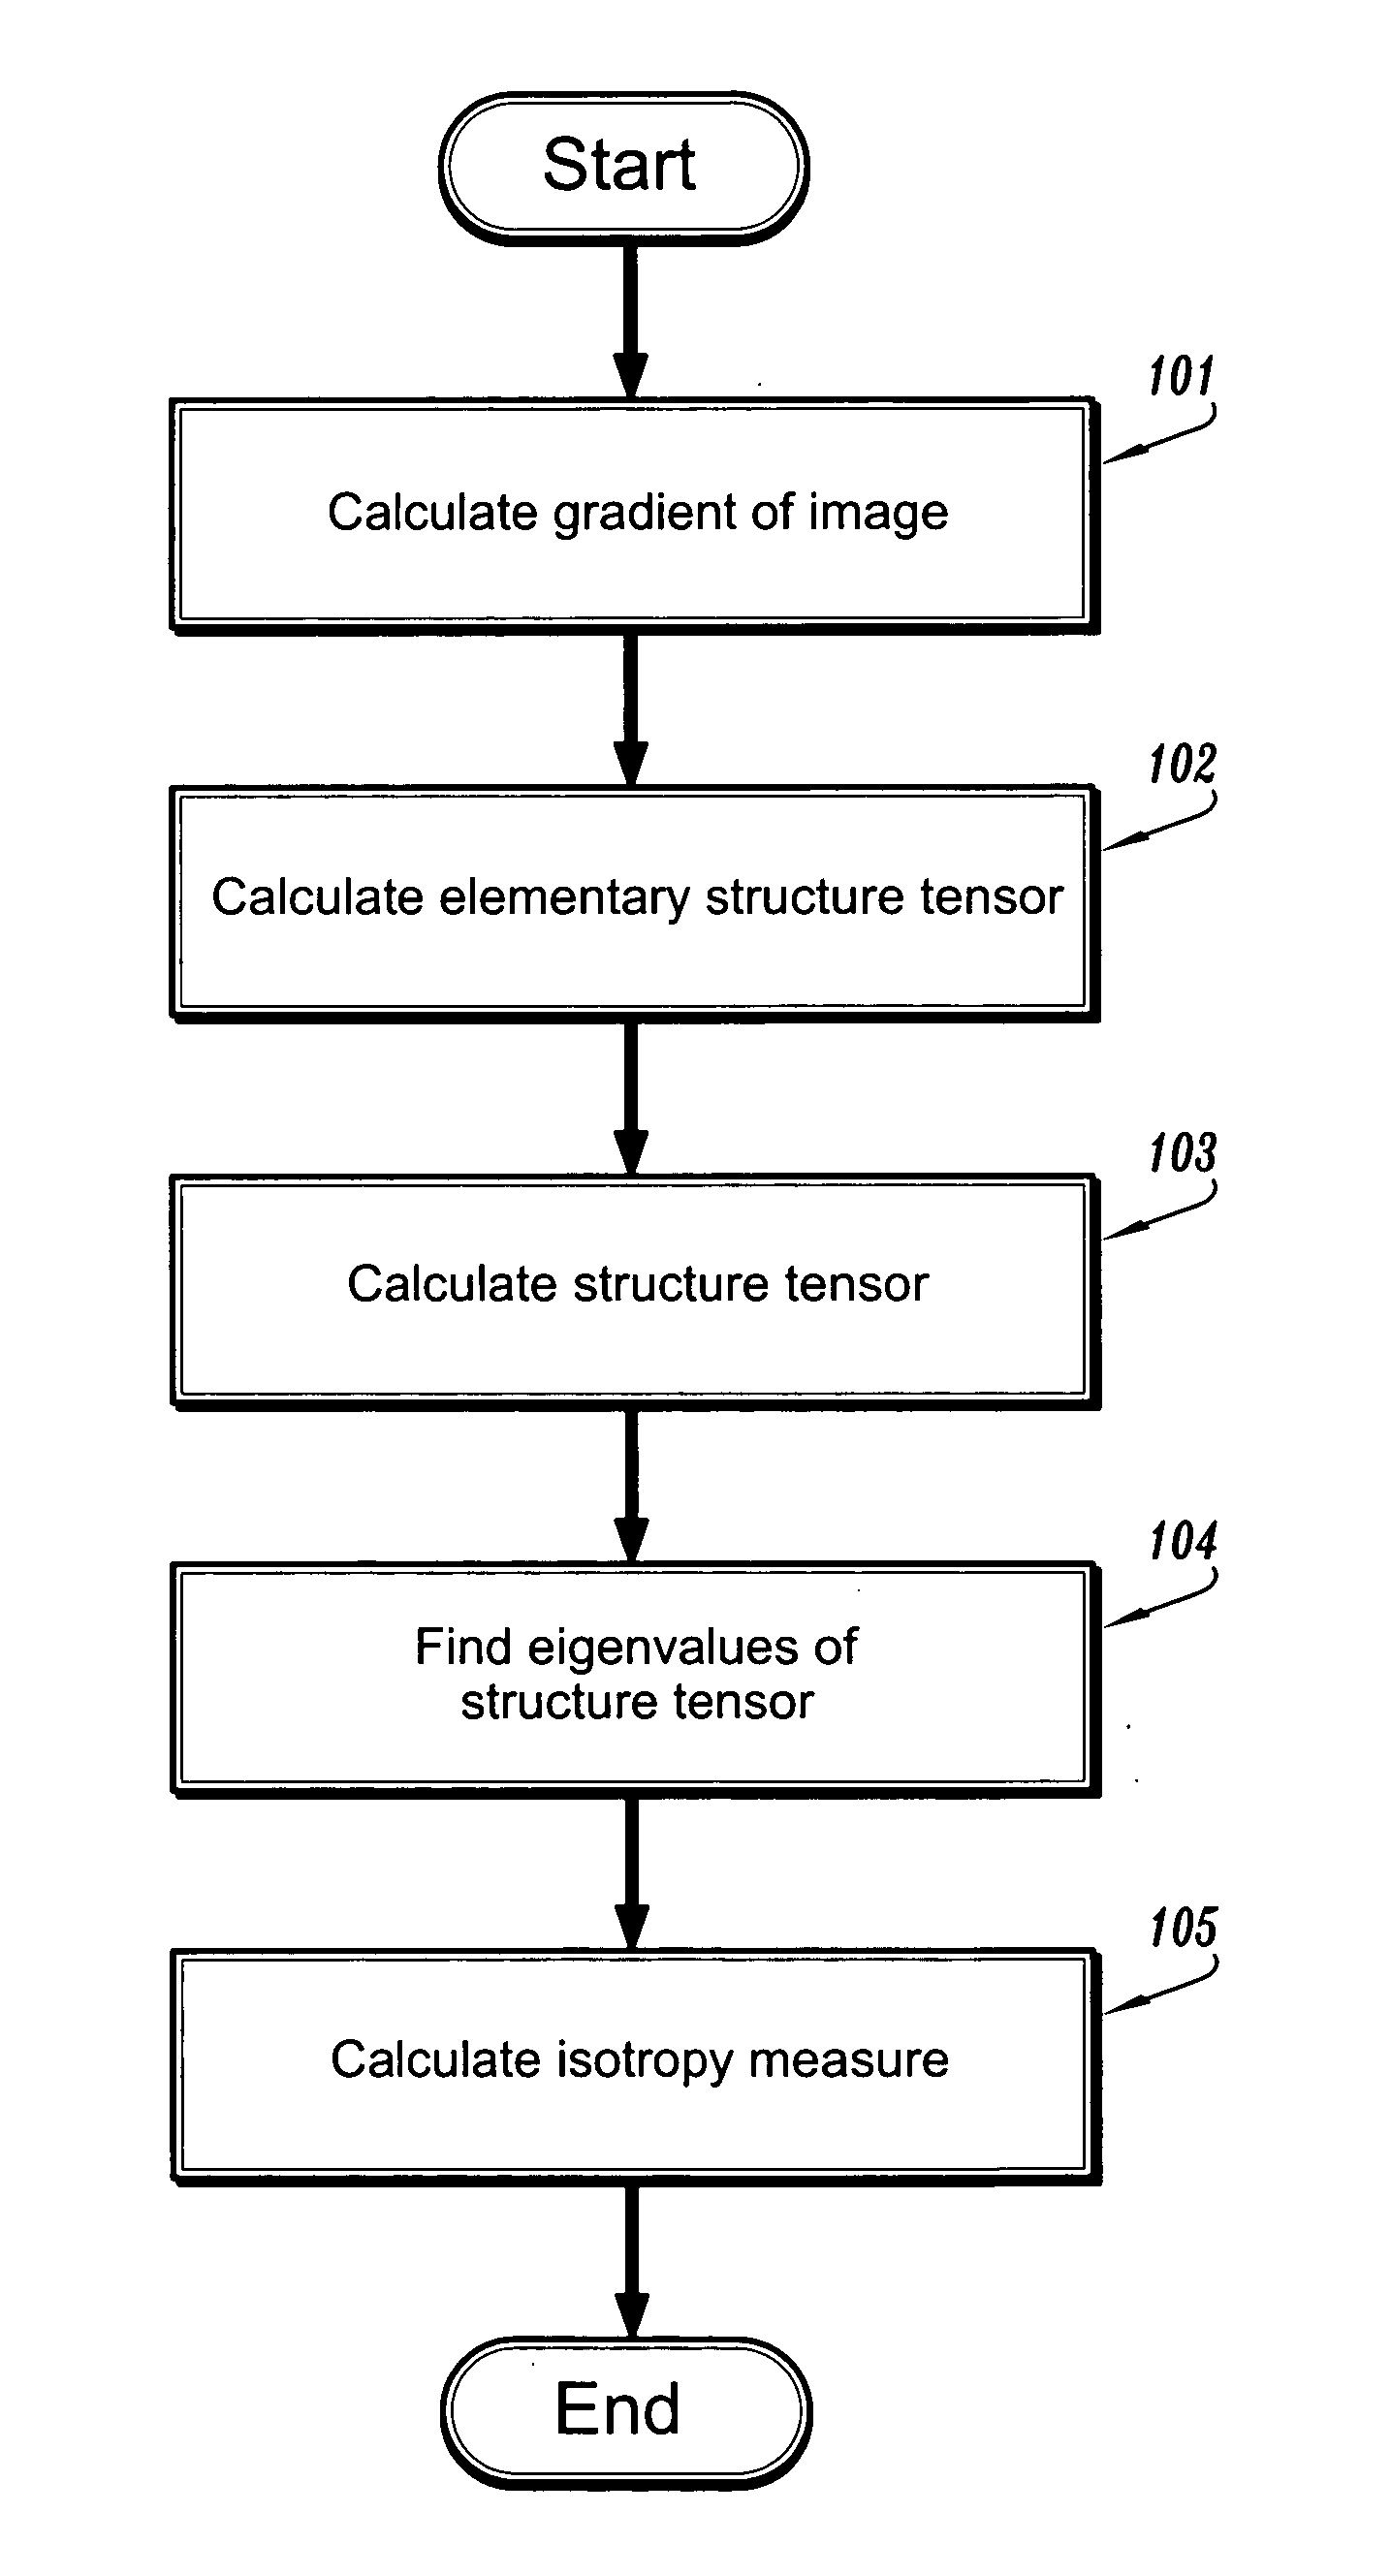 Method and system for using structure tensors to detect lung nodules and colon polyps